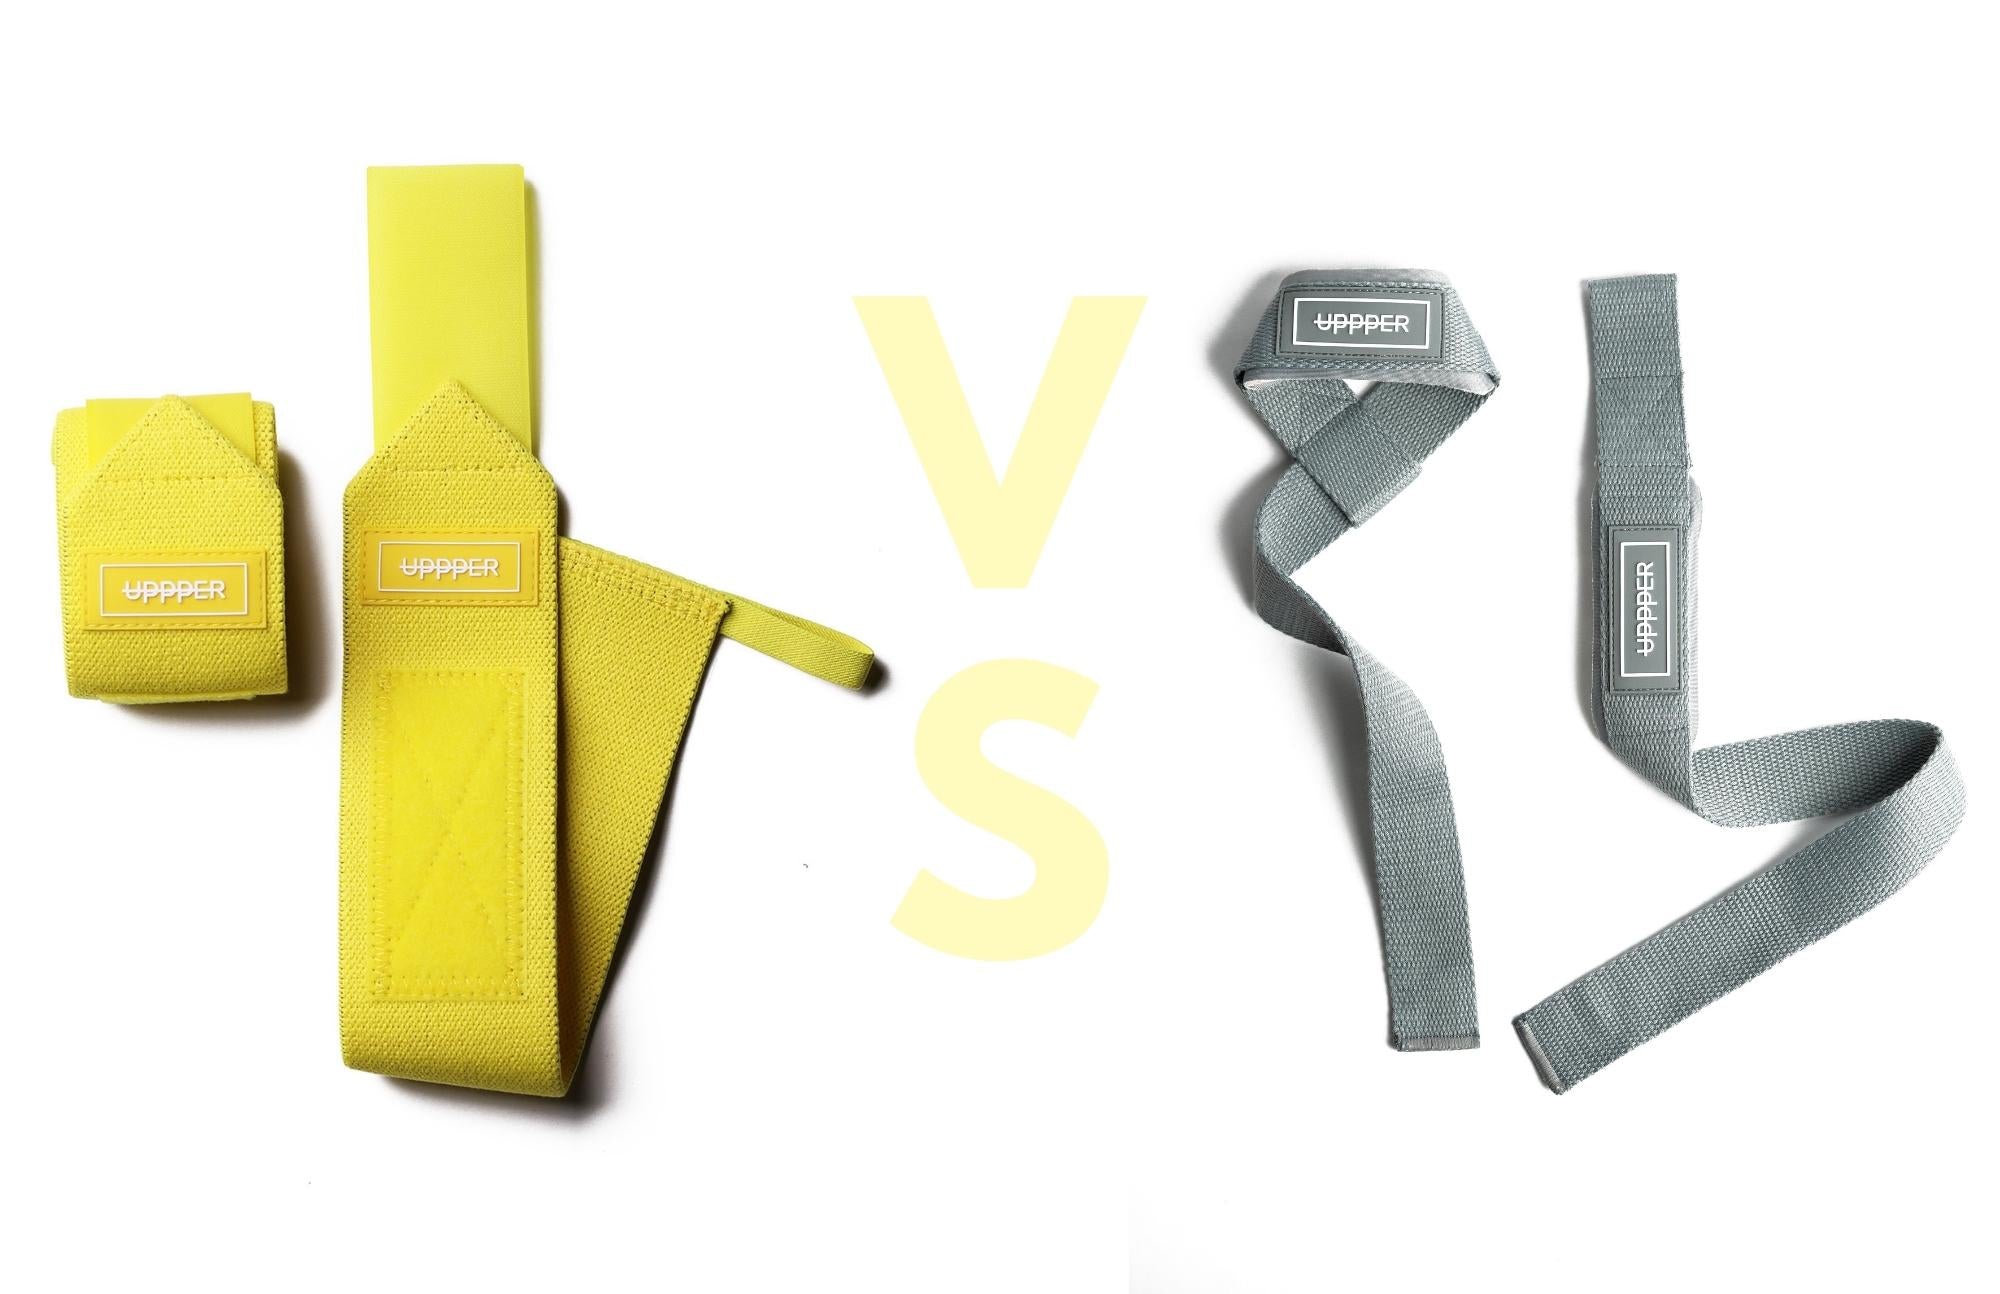 Lifting Straps vs Wrist Wraps: What's the Difference? – UPPPER Gear